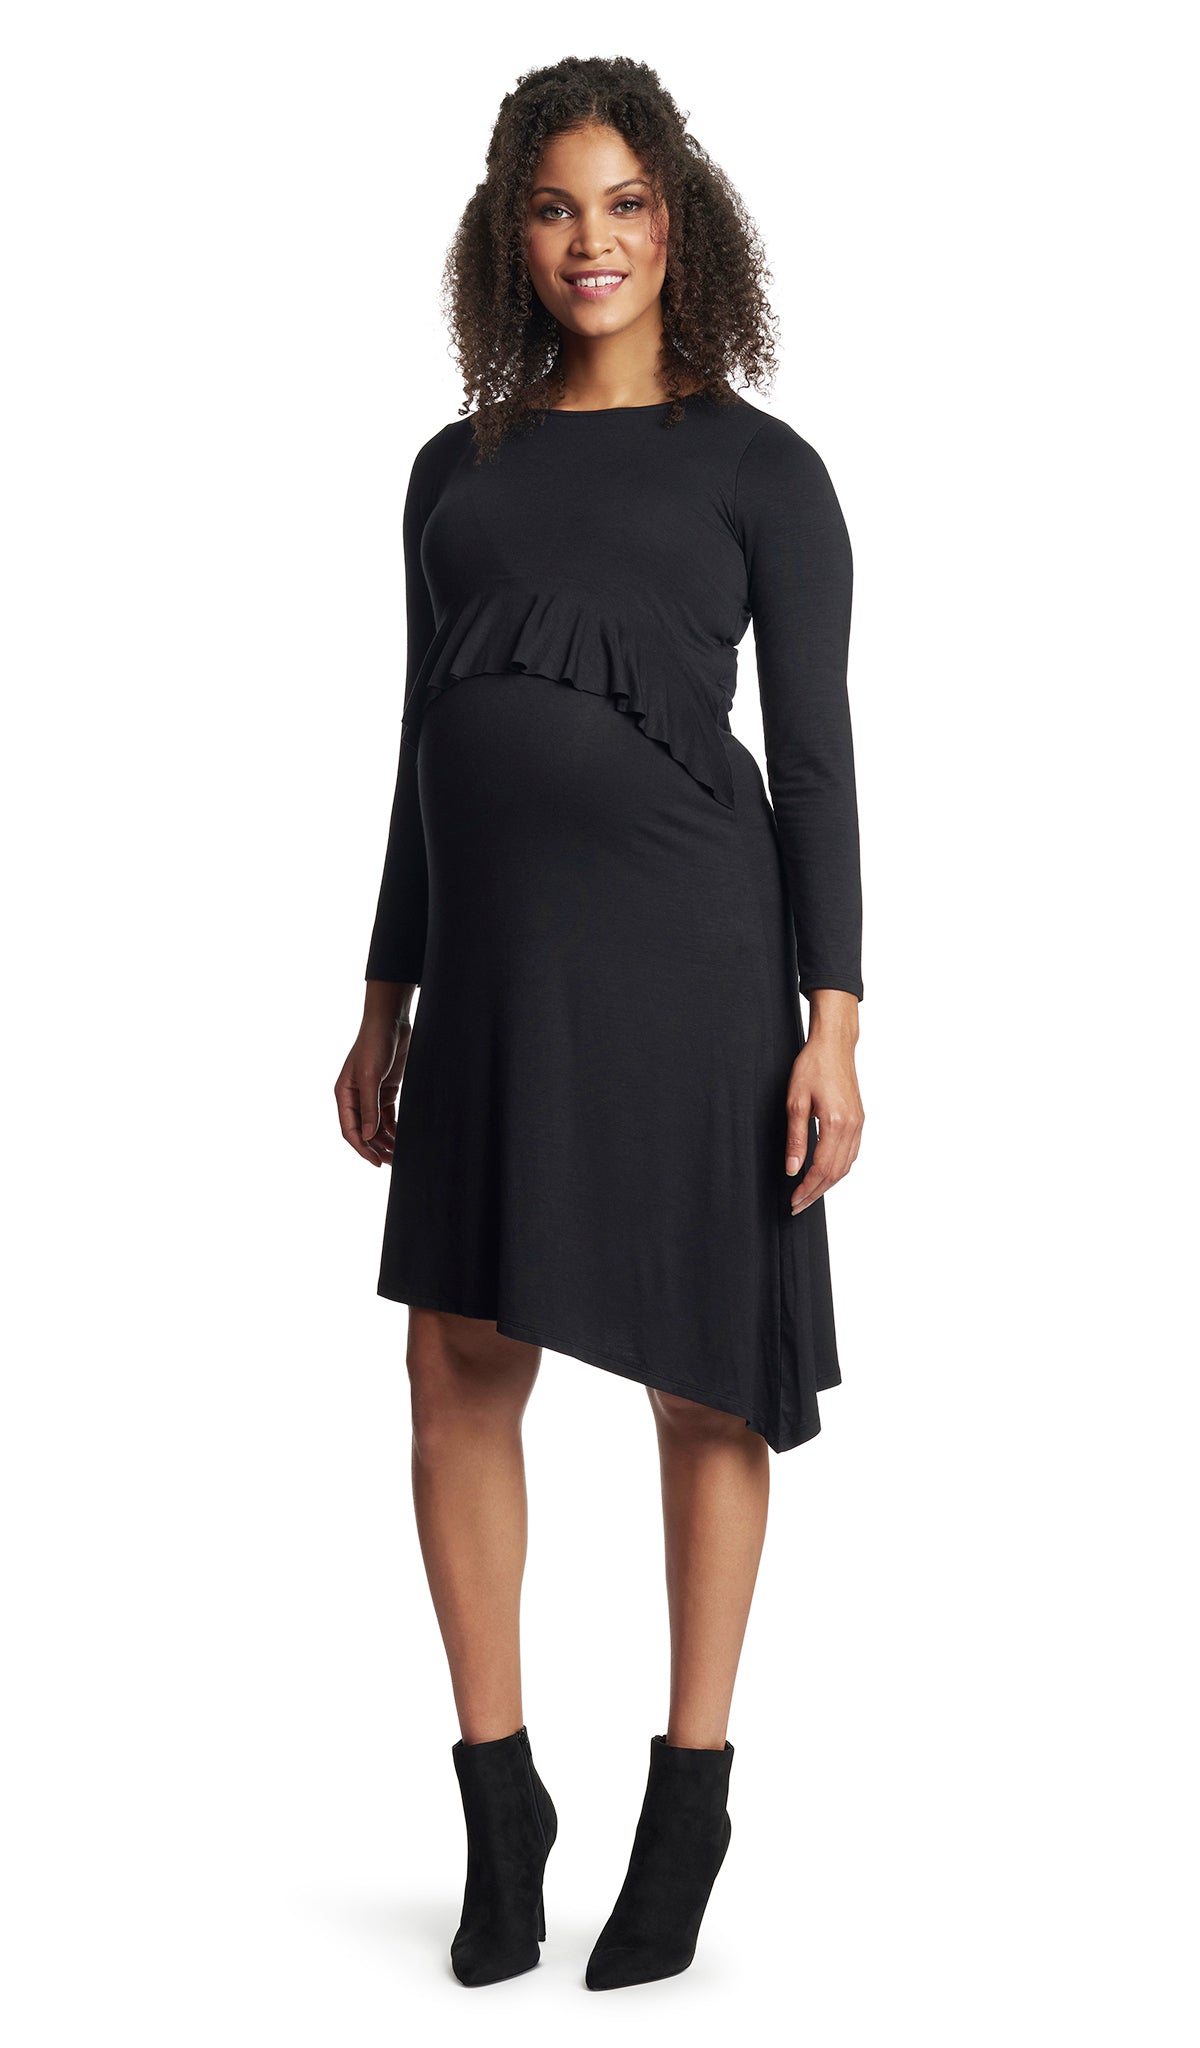 Black Melissa dress worn by pregnant woman with arms down next to side.